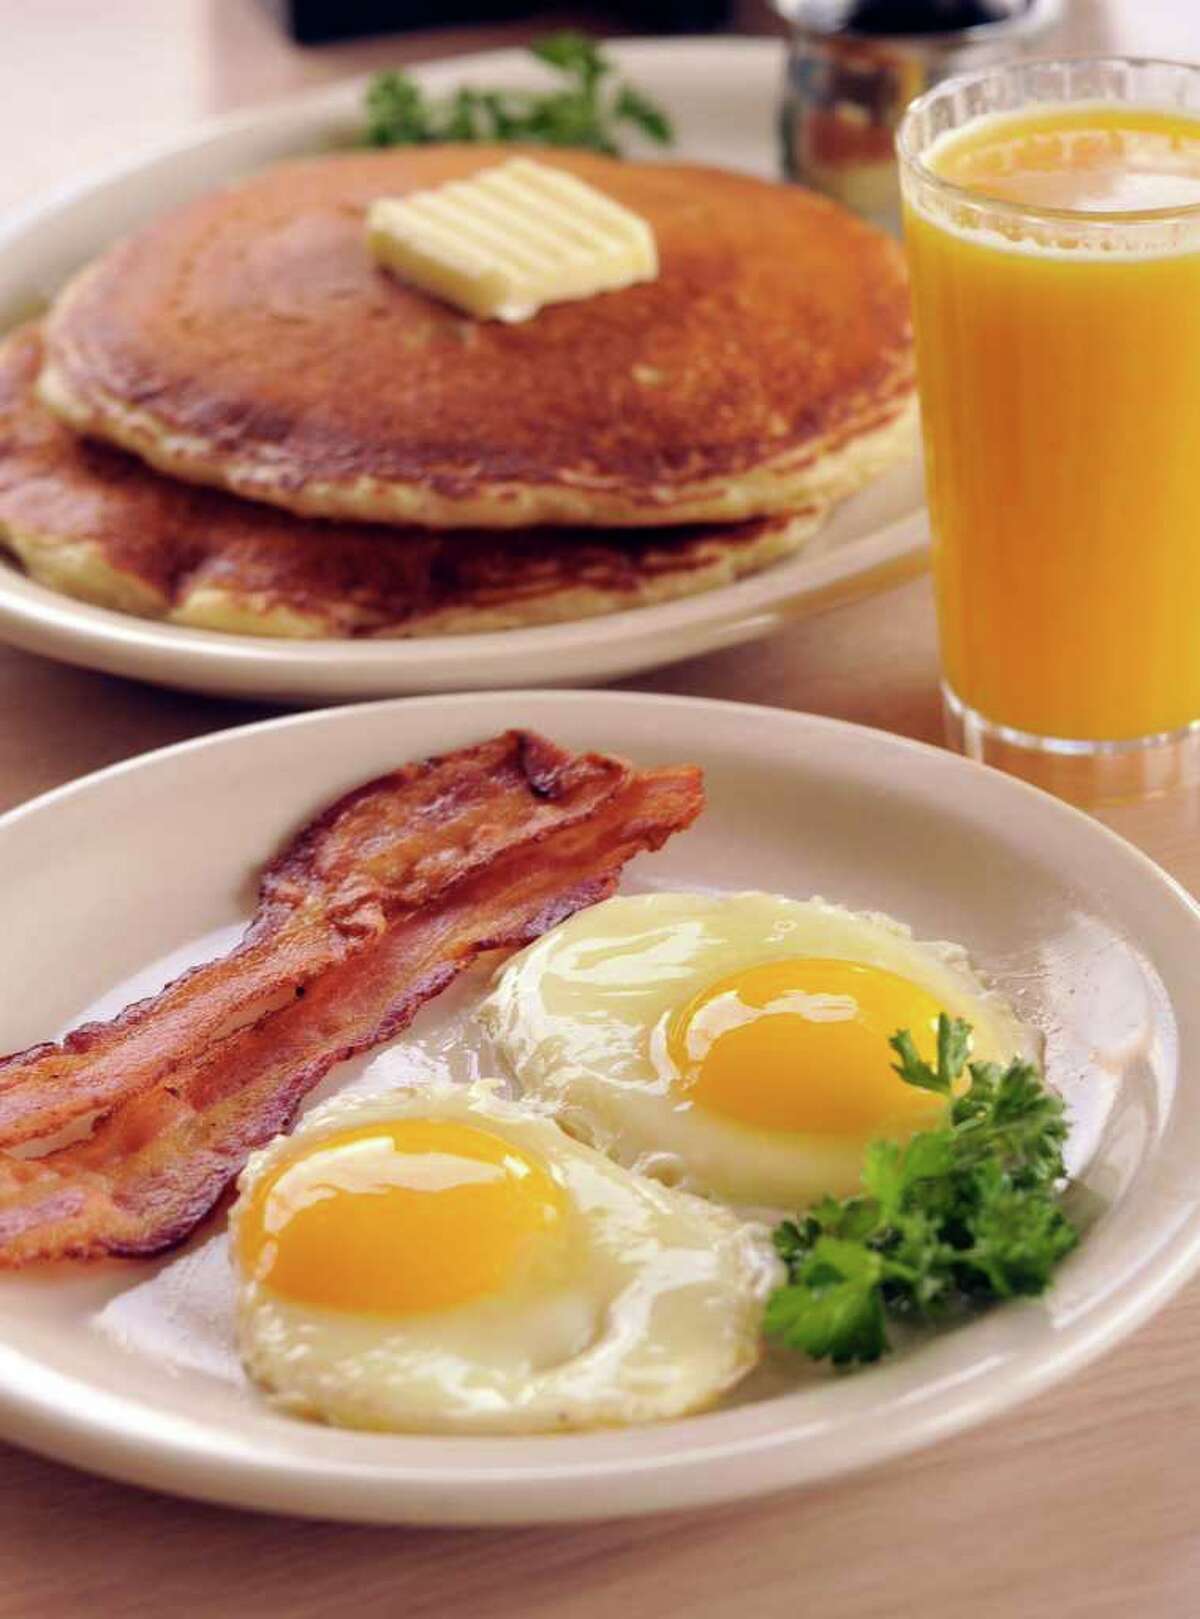 Bacon and Eggs from Jim's Restaurant, voted the Readers' Choice for best service and best longtime favorite.